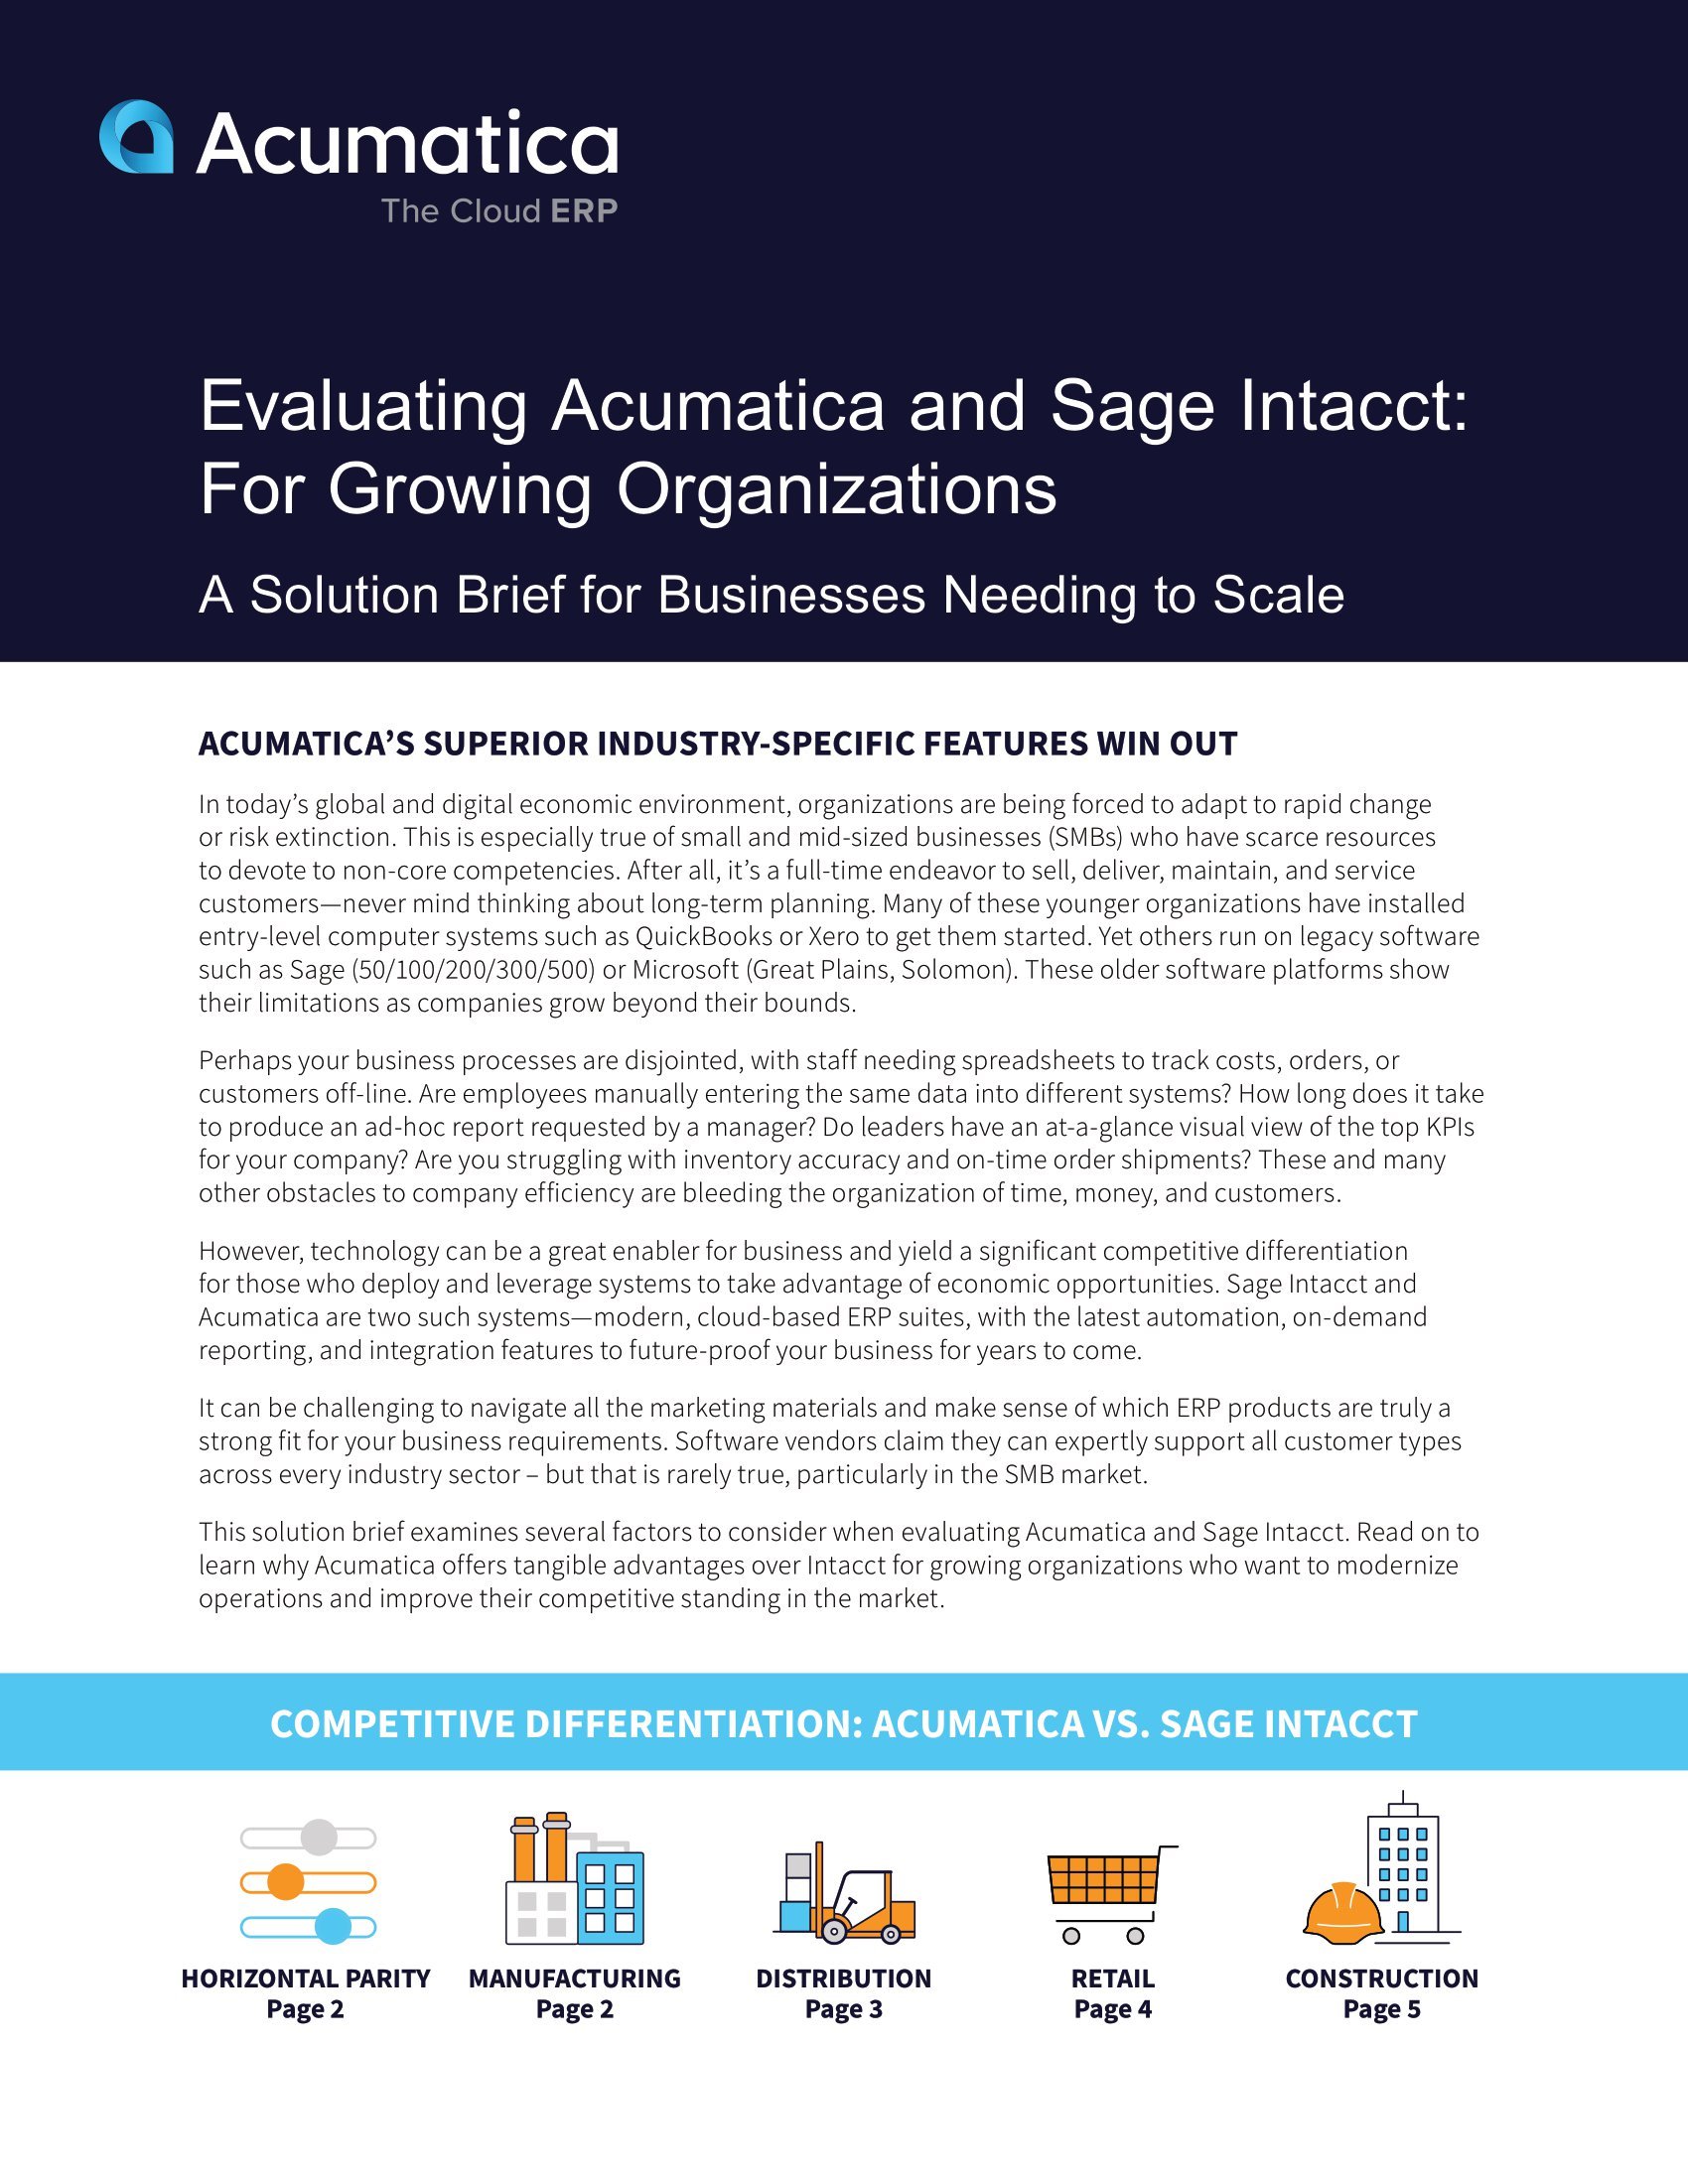 Evaluating Acumatica and Sage Intacct for Businesses Needing to Scale